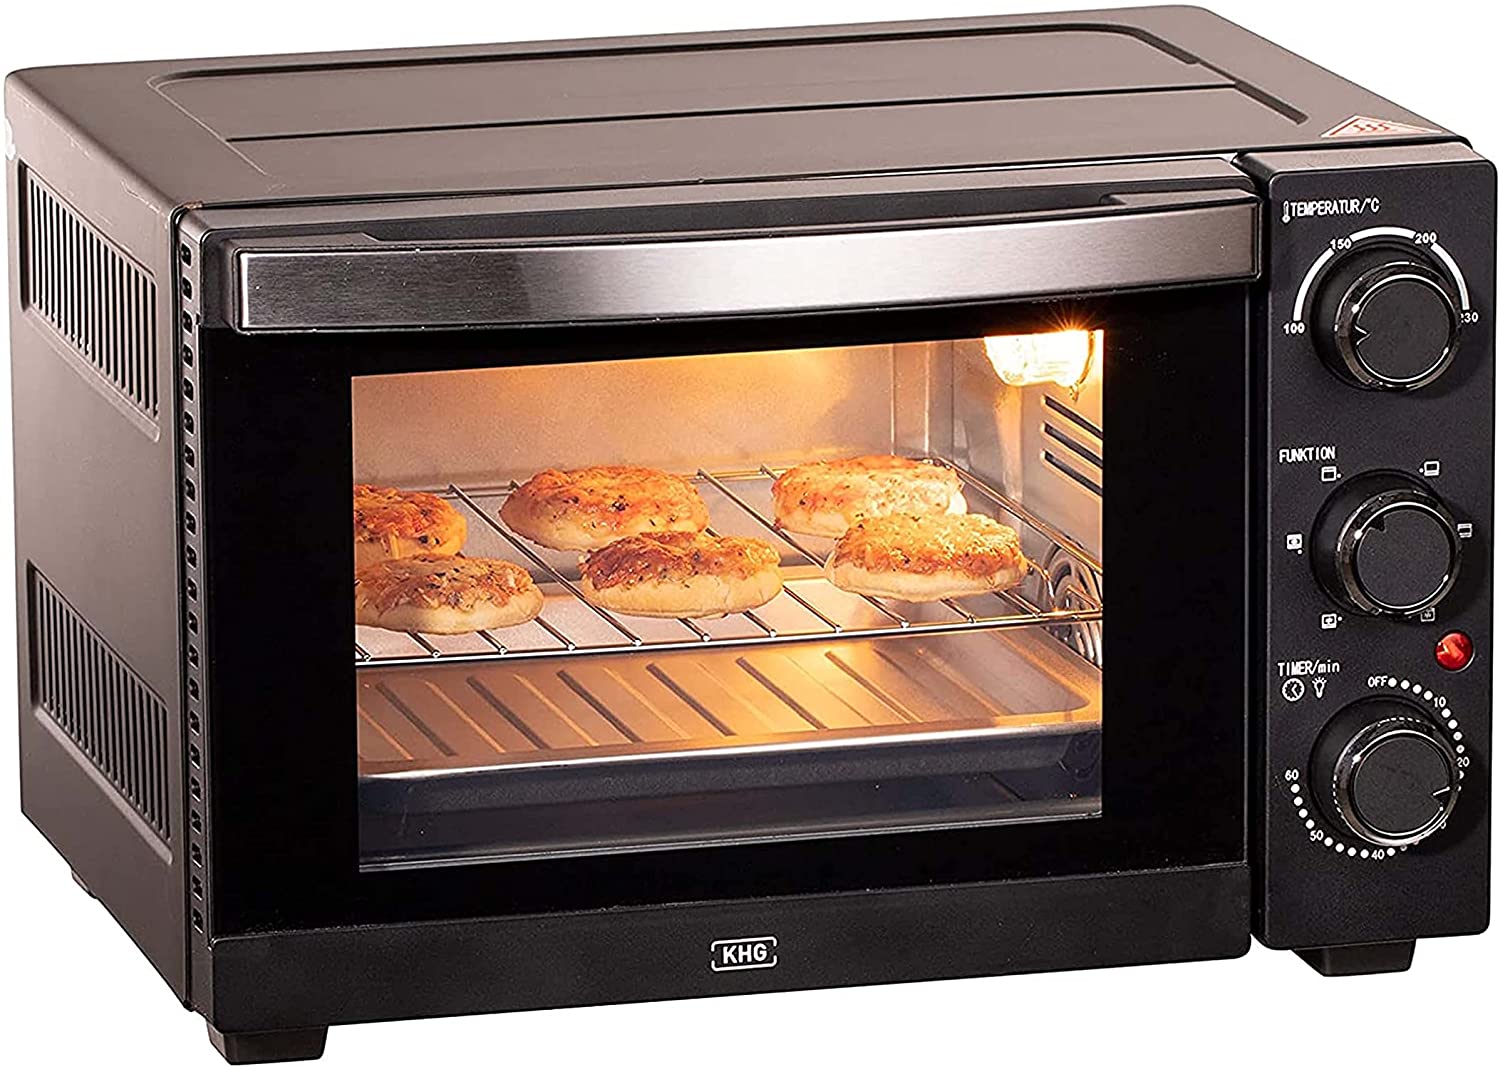 KHG MBO-15S Mini Oven Metal in Black with Circulating Air, Top / Bottom Heat, 15 L Cooking Chamber, Includes 6 Function Levels, Timer, Interior Lighting, Baking Tray, Removal Handle, Grill Rack